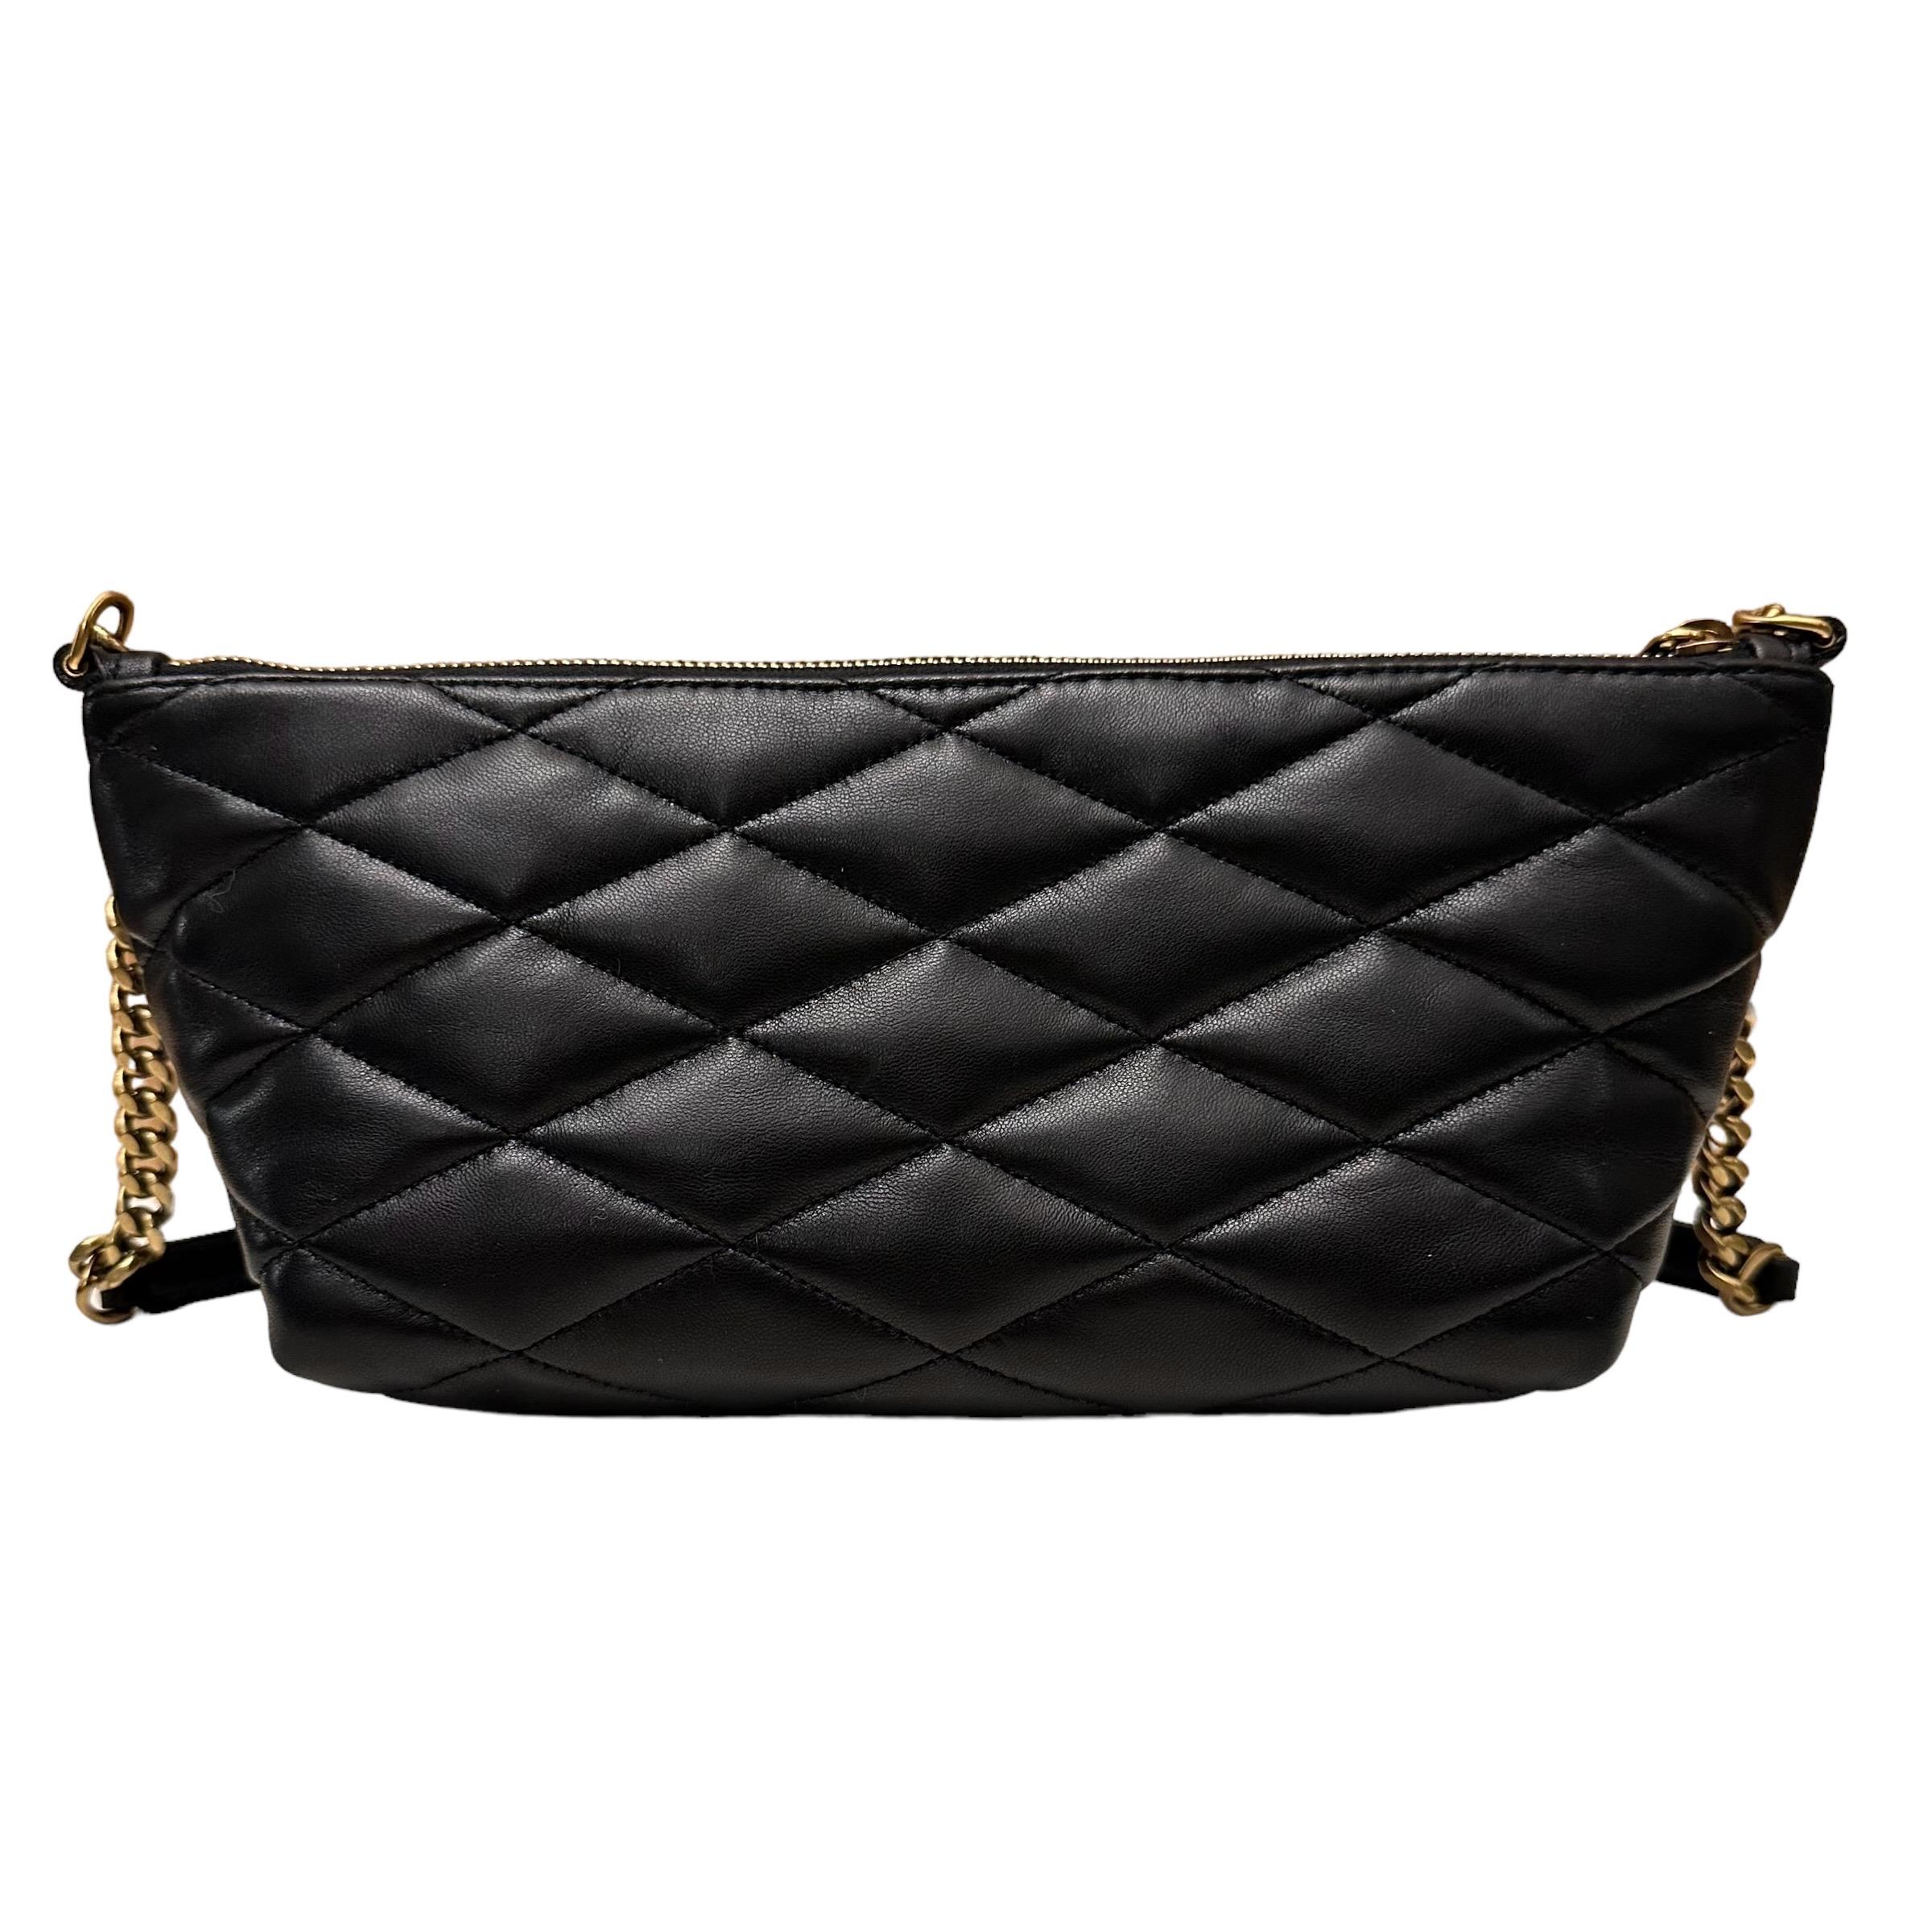 This pre-owned but new mini bag from the house of Saint Laurent is part of the Sade collection !
It is crafted from black quilted lambskin leather with a zip closure on top.
It features a chain strap with leather so it sits comfortably over the